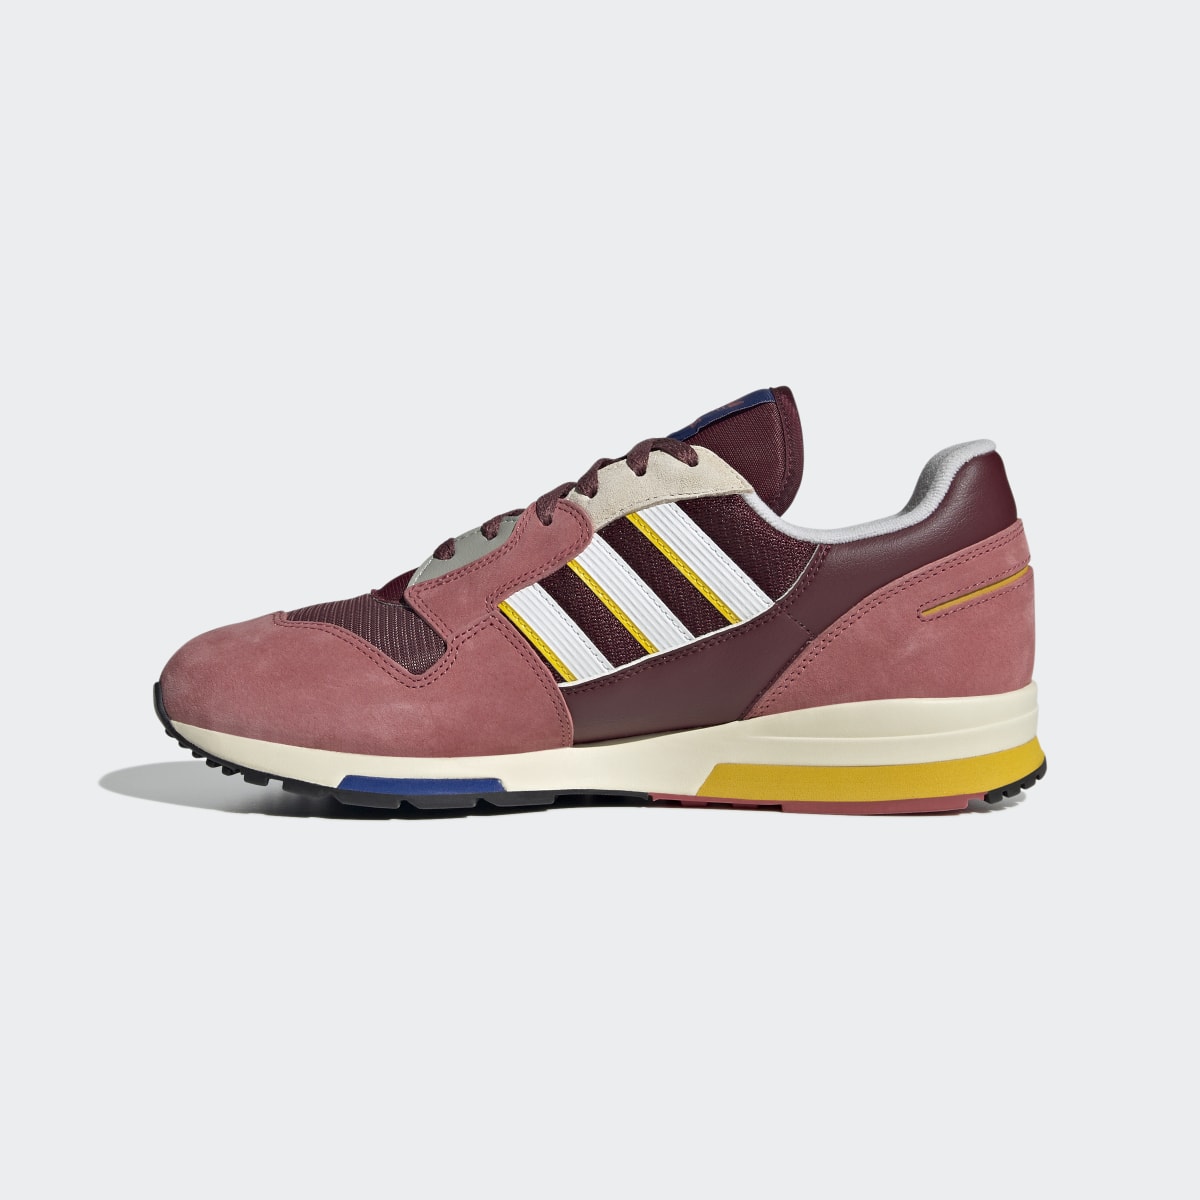 Adidas ZX 420 Shoes. 7